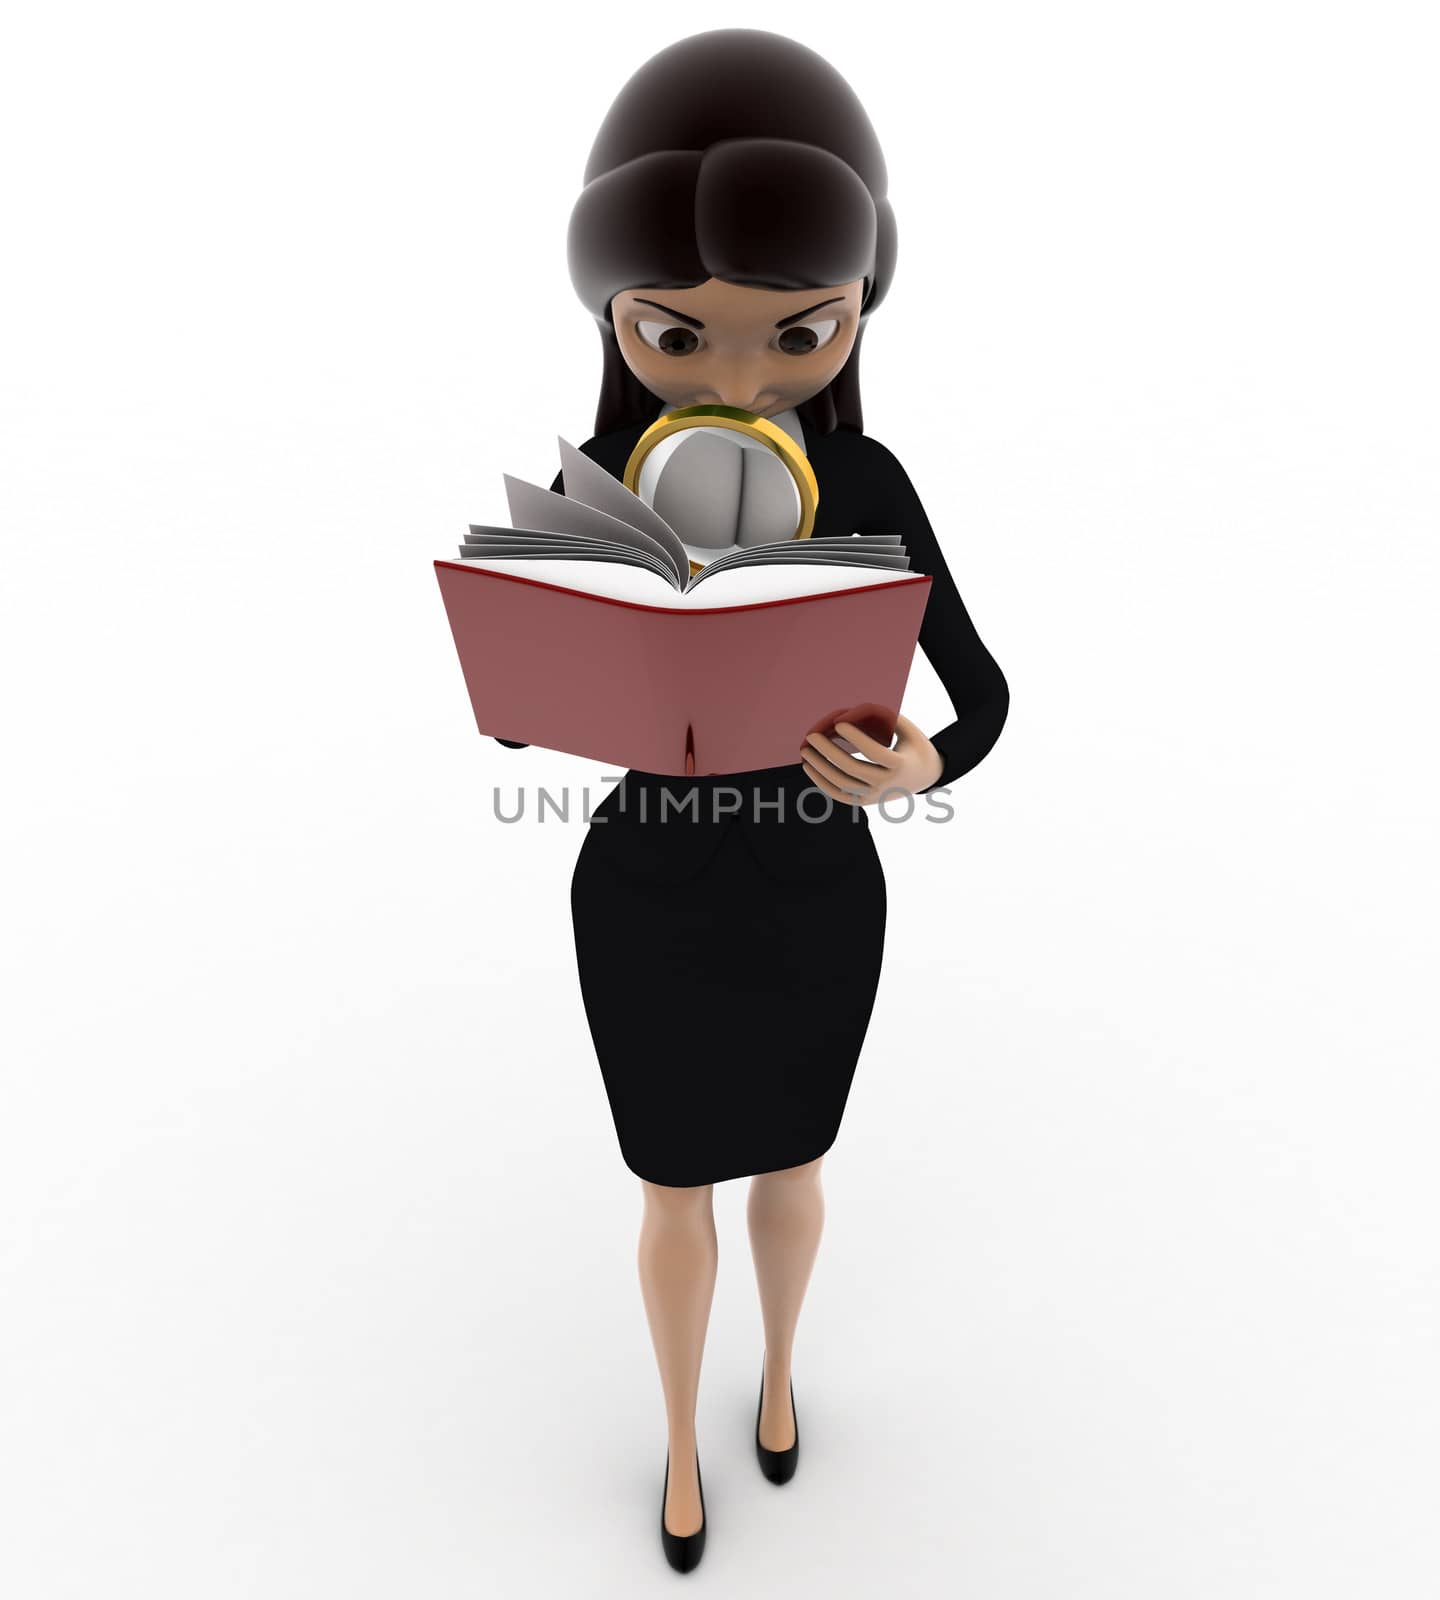 3d woman searching in book using magnifying glass concept by touchmenithin@gmail.com